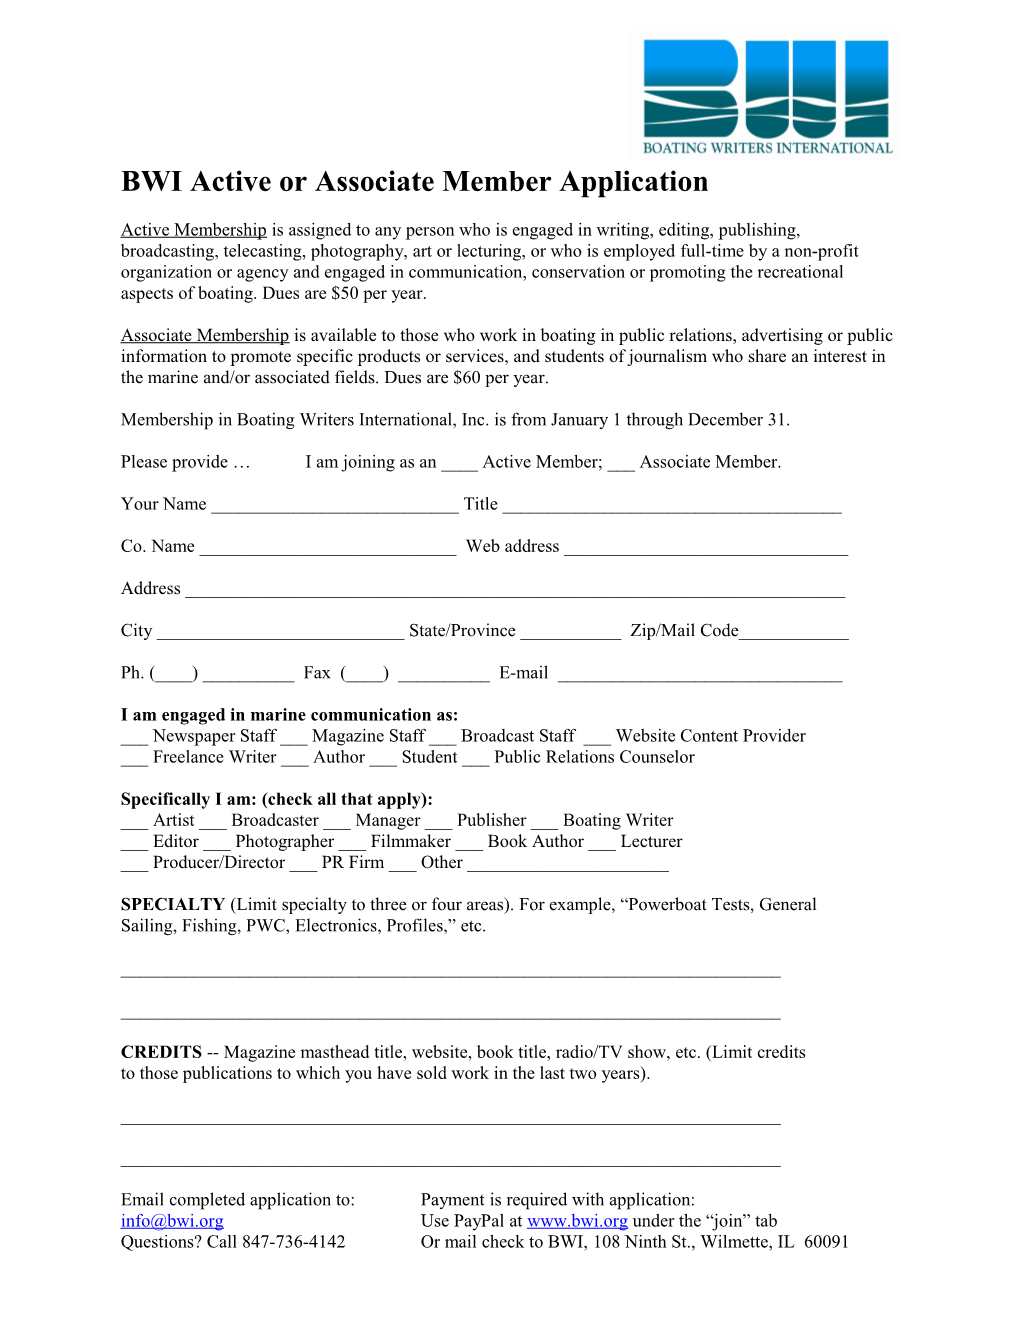 BWI Active Or Associate Member Application